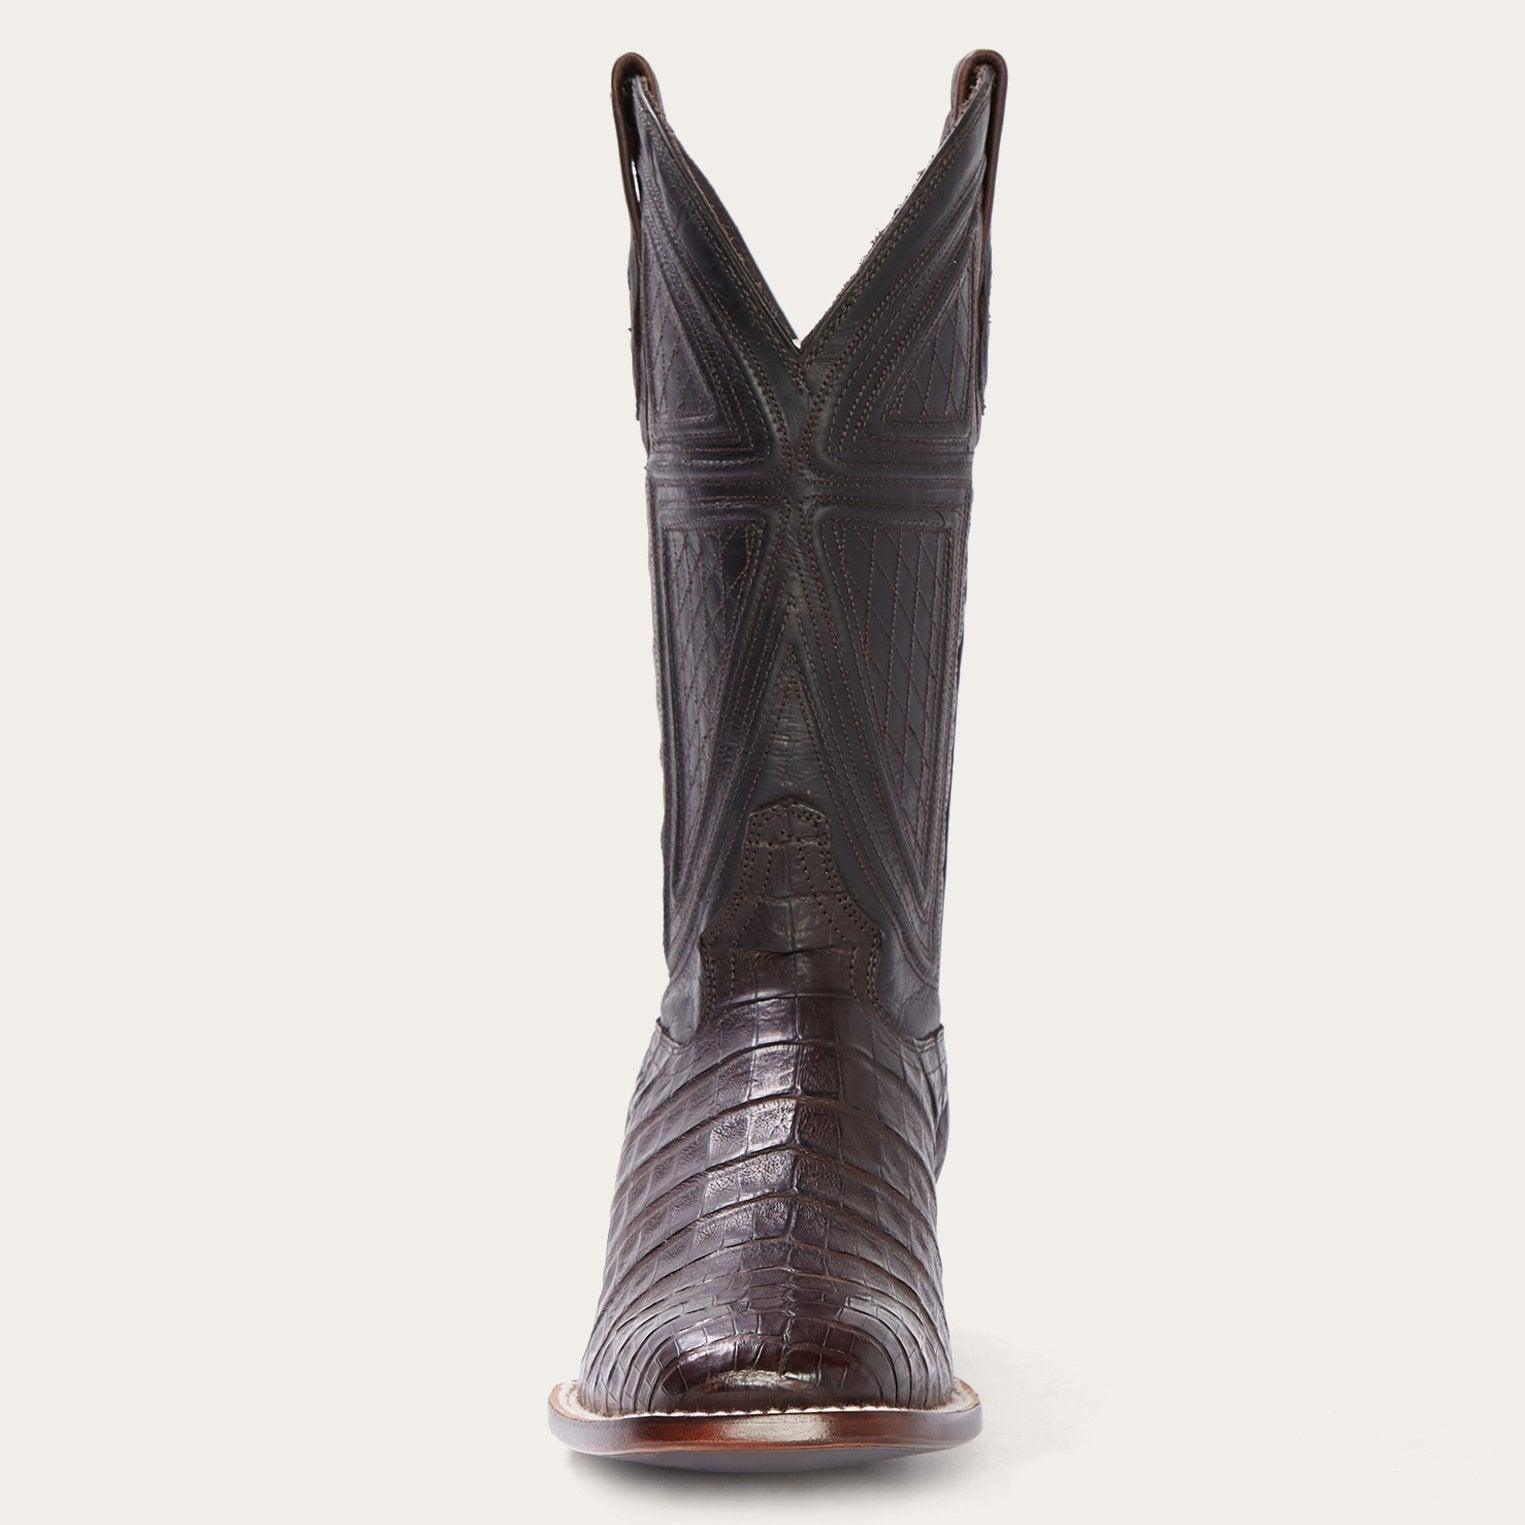 Stetson Kaycee Brown Caiman Belly Cowboy Boot - Flyclothing LLC